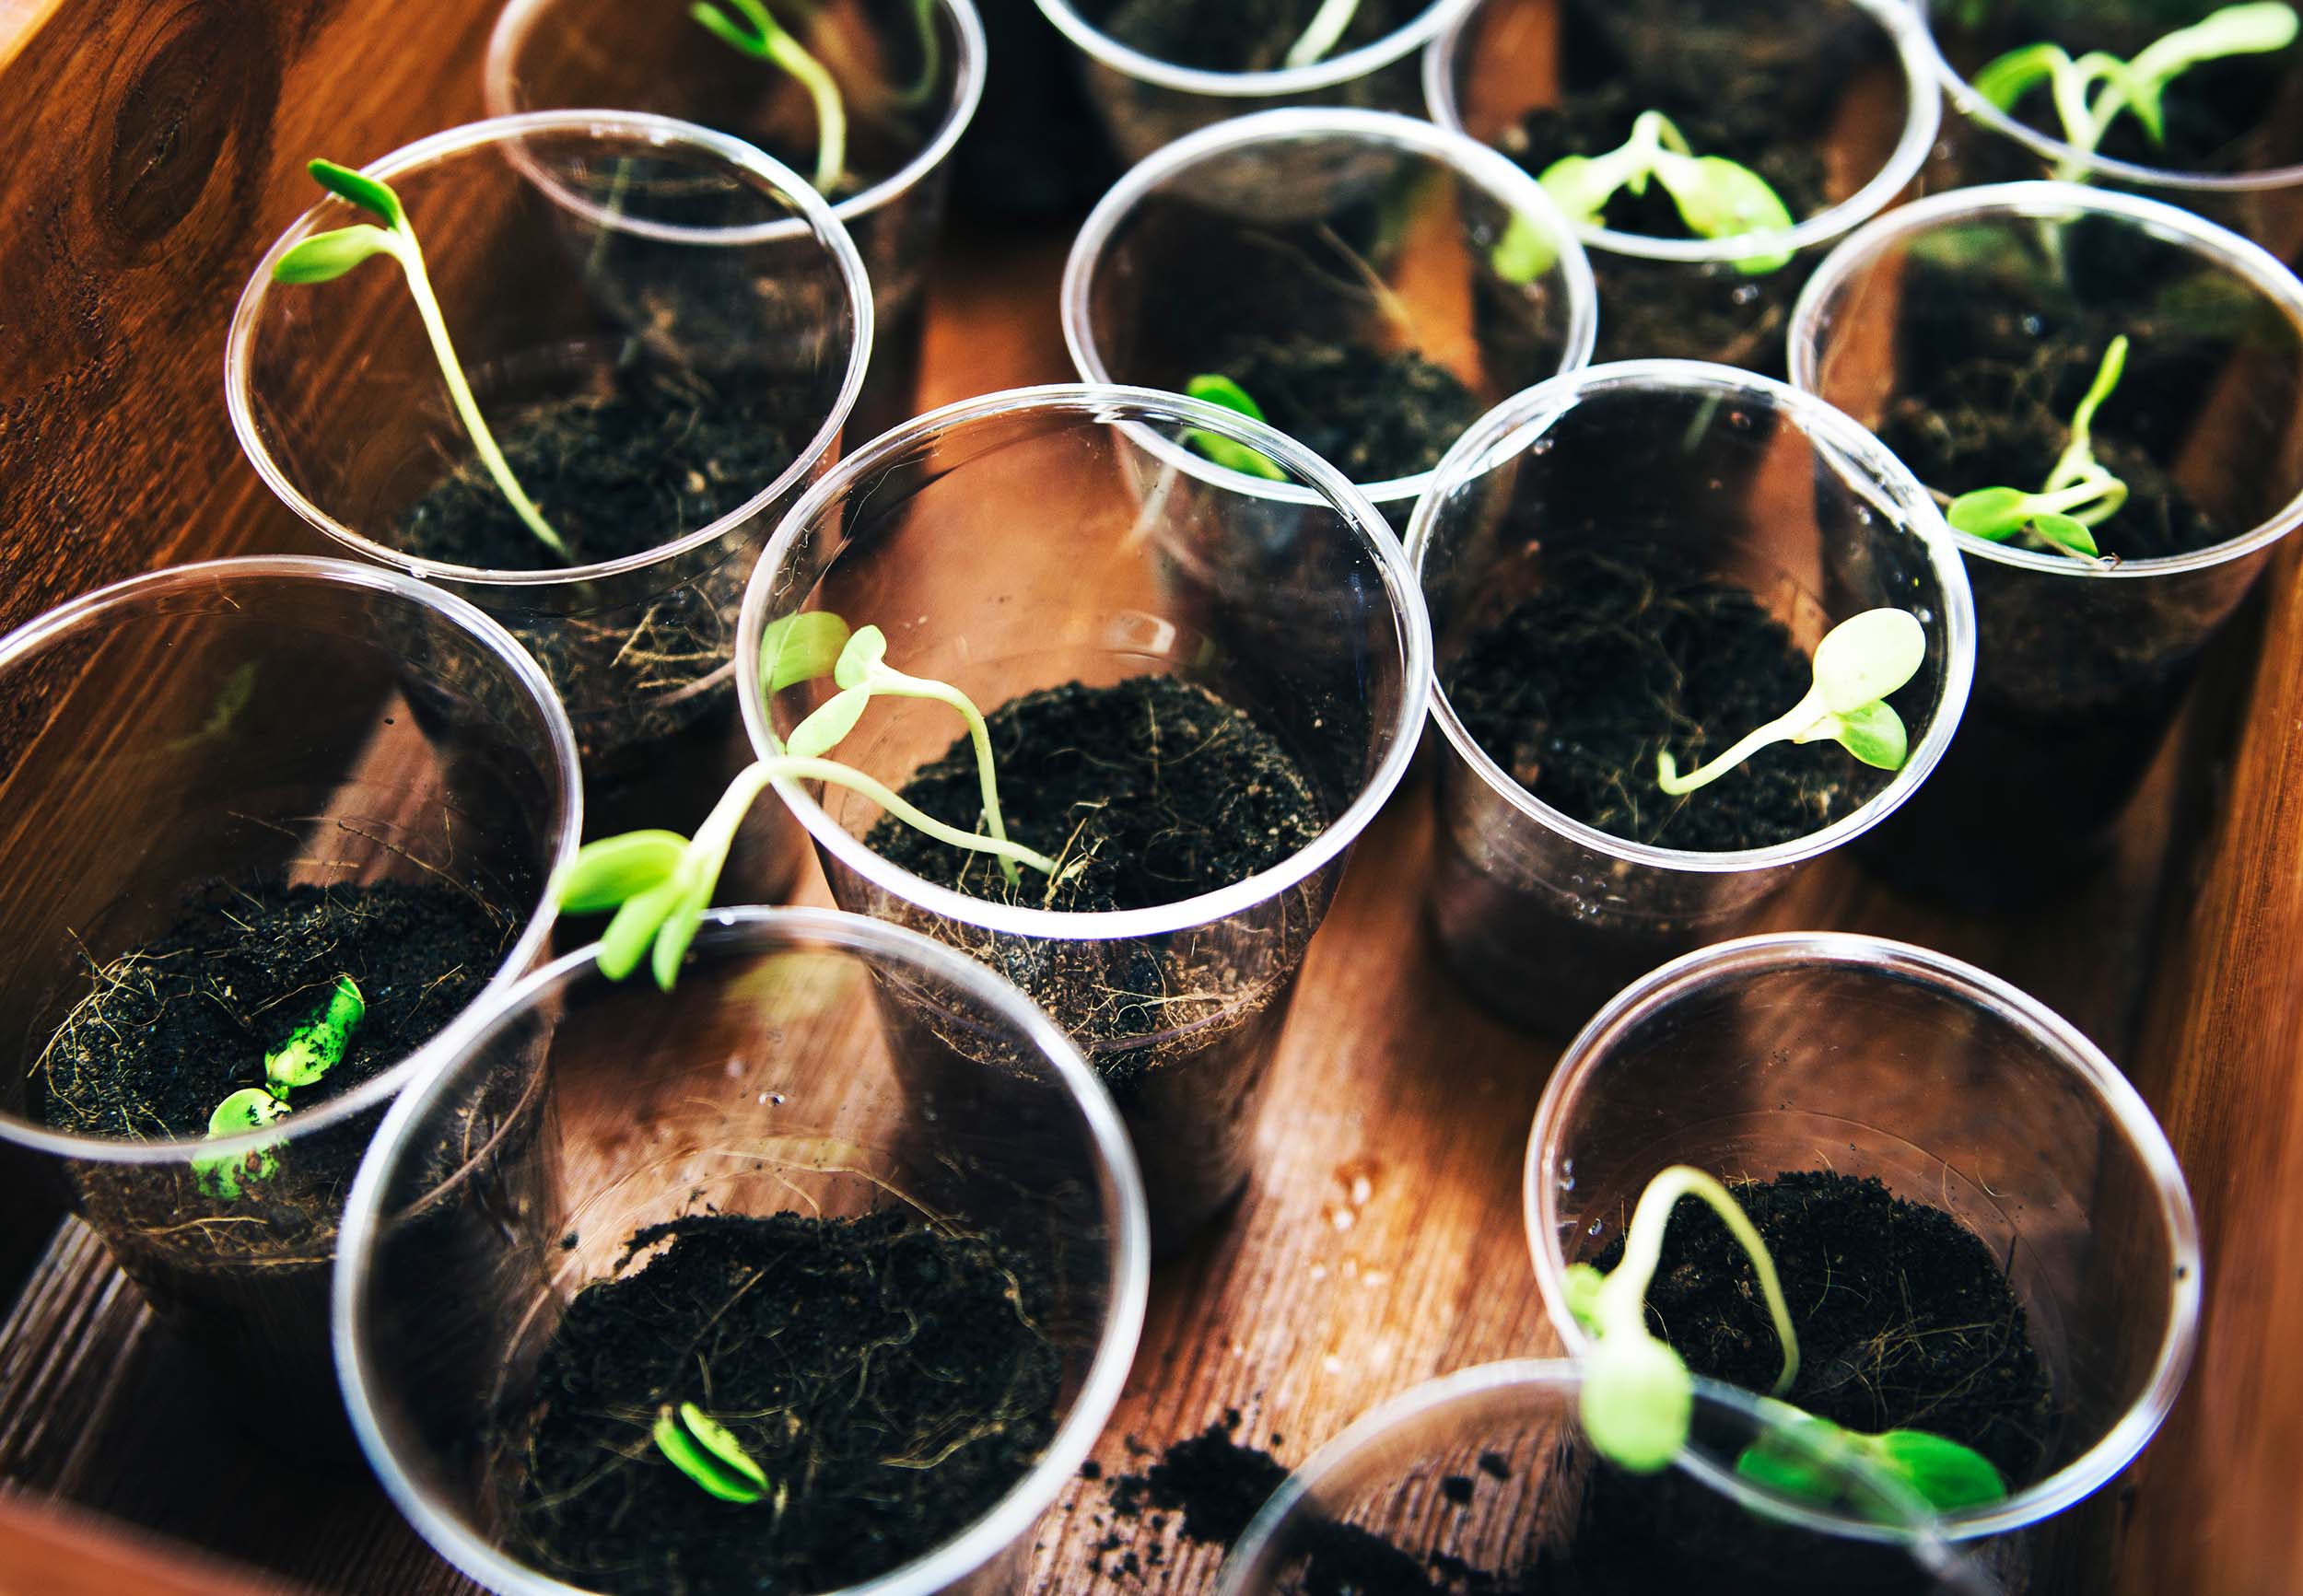 Young sprouts growing in soil in a plastic cup